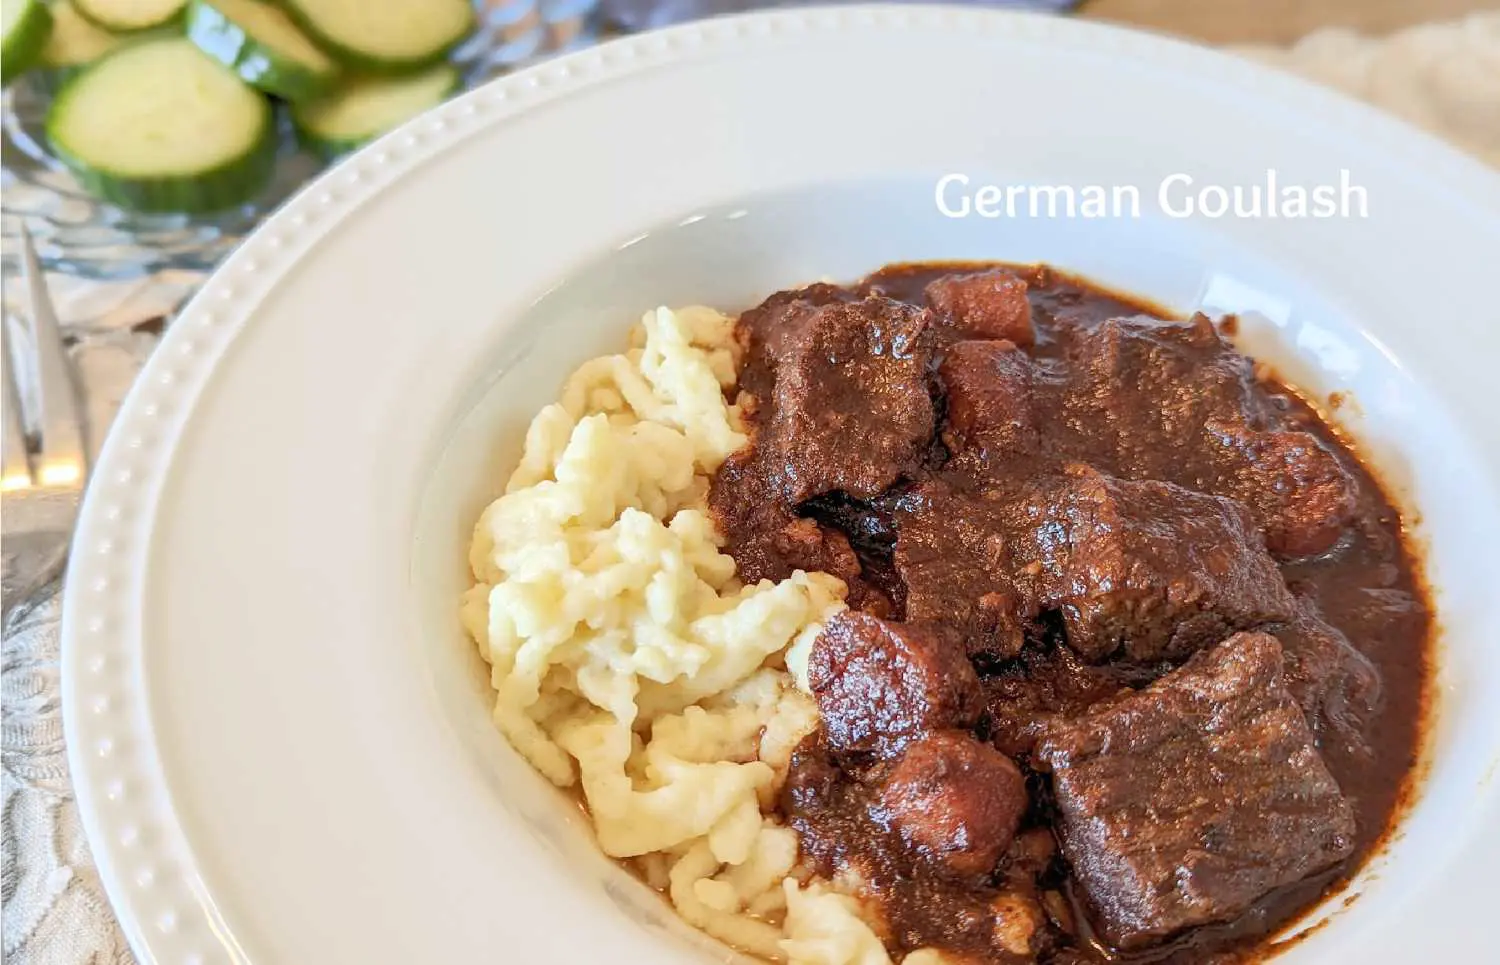 German Goulash Recipe- A Love Letter From the Kitchen